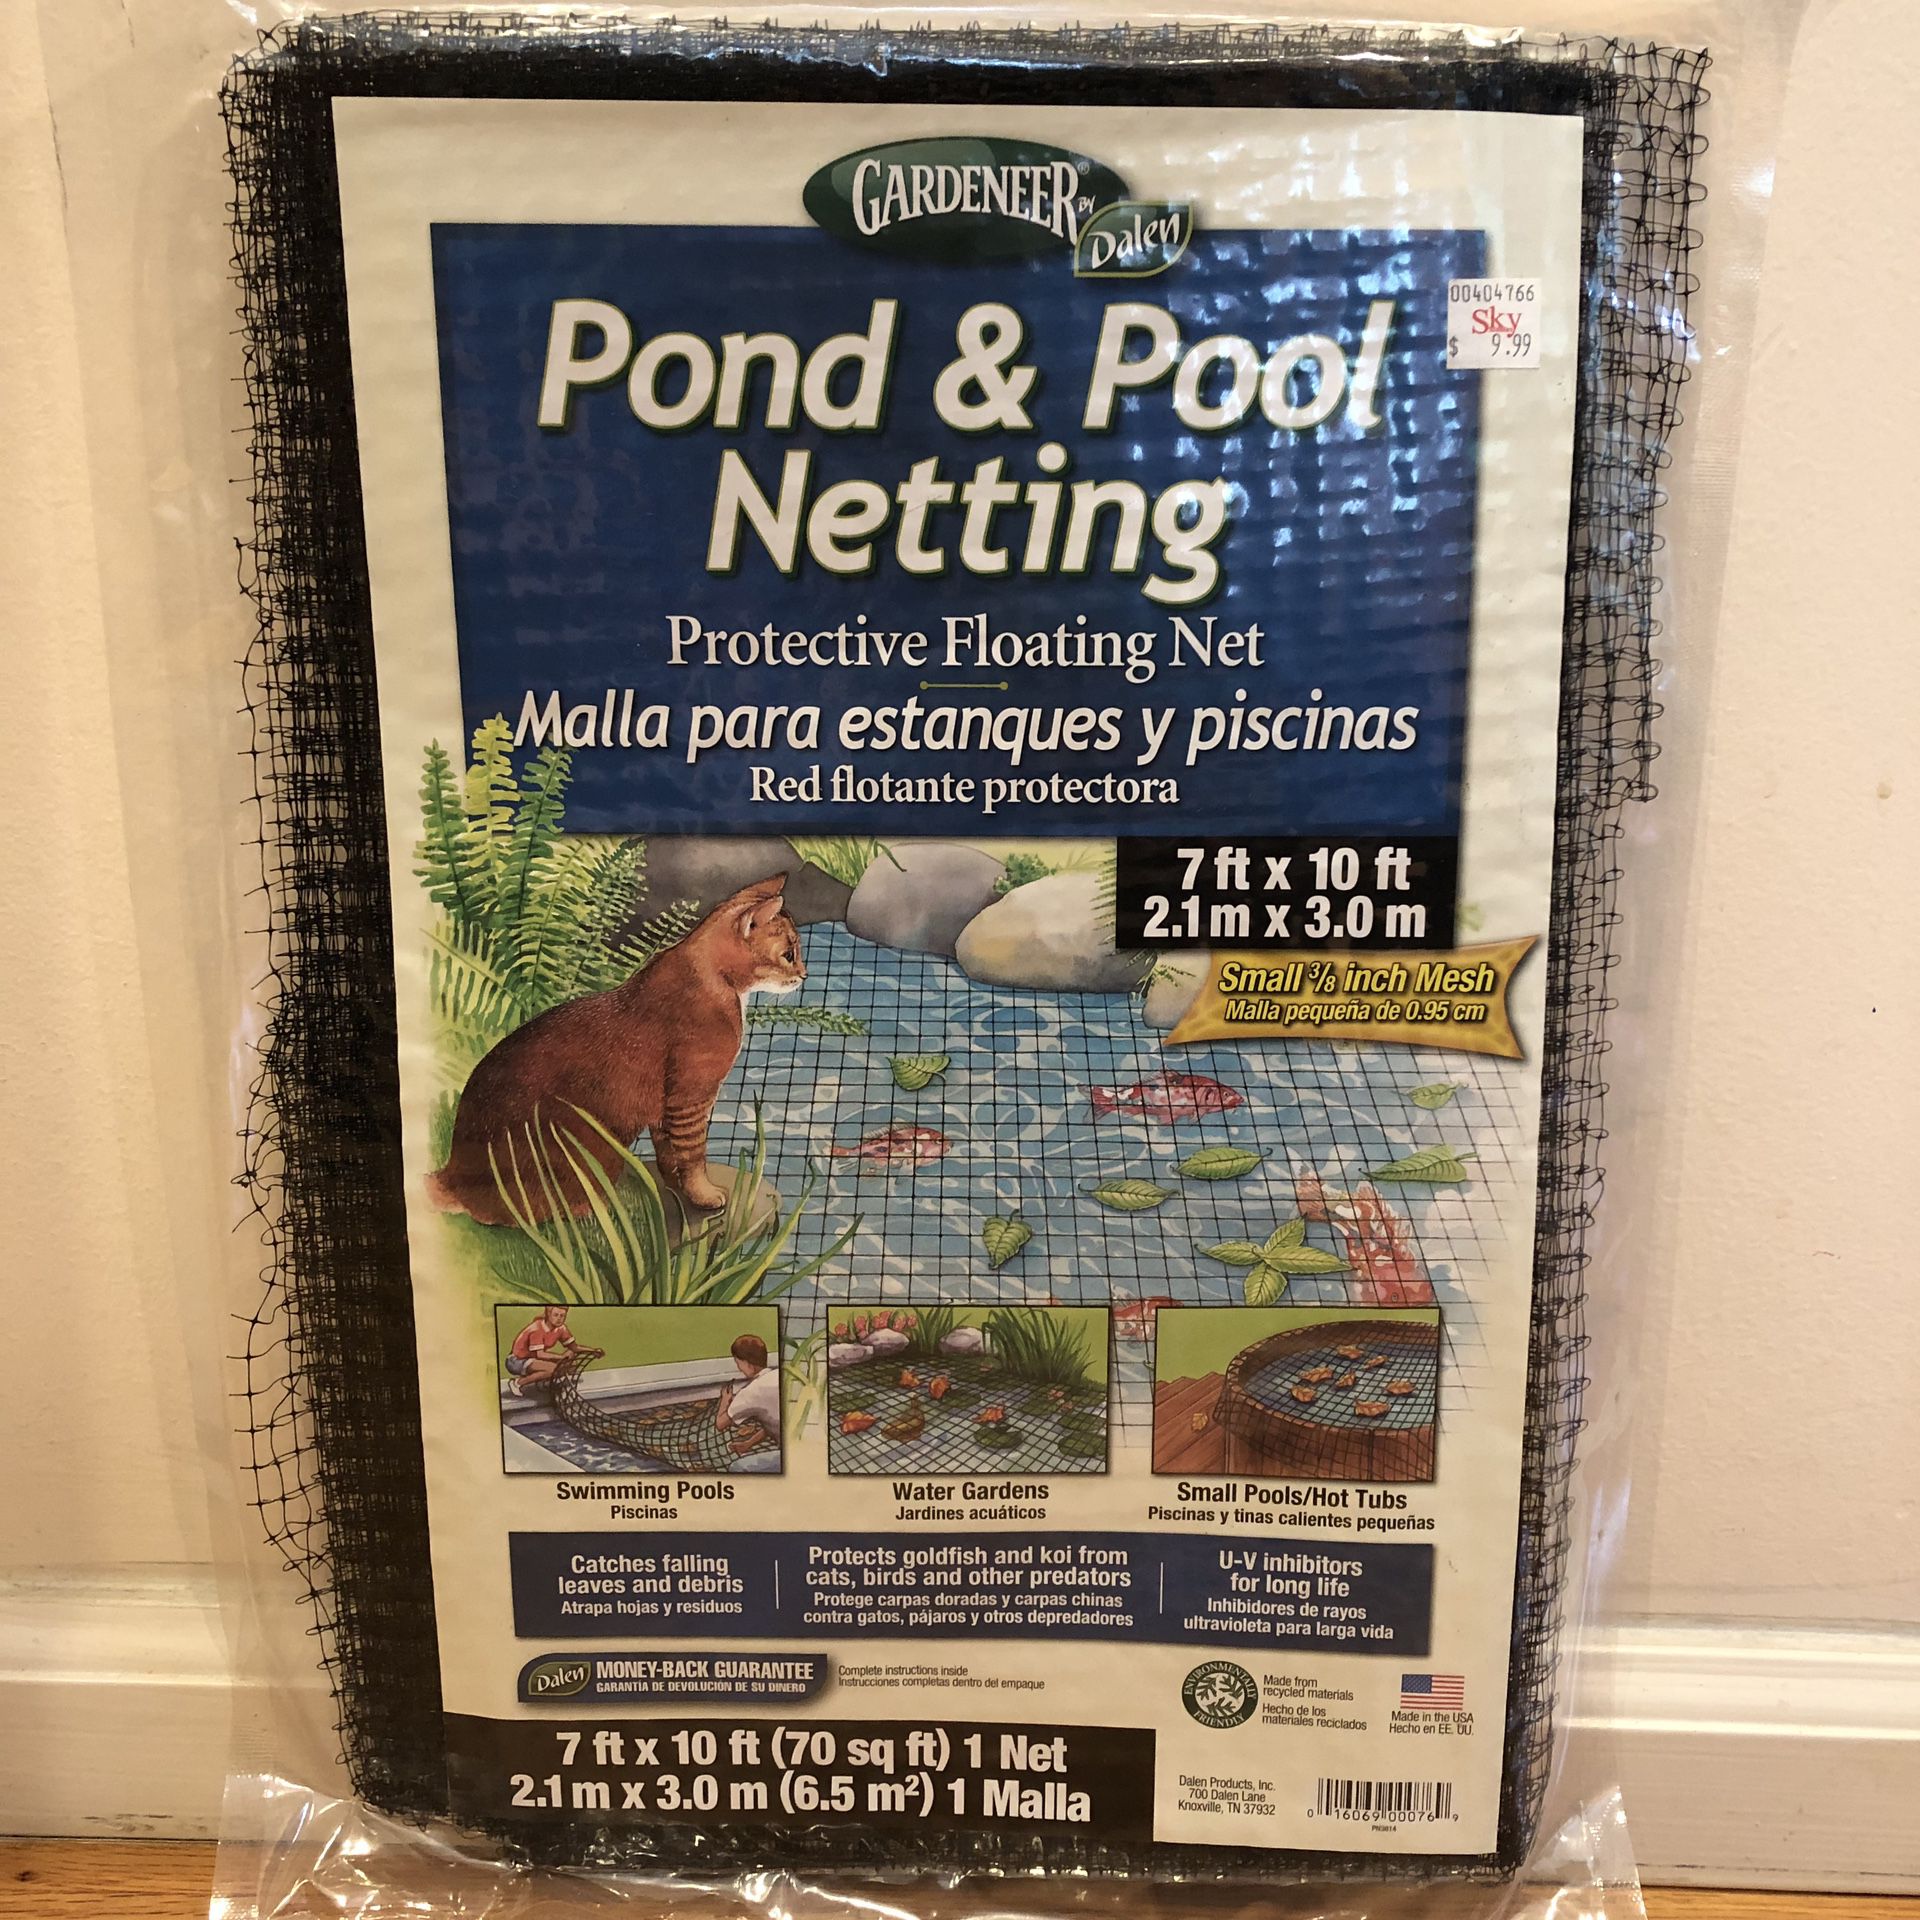 New Pond & Pool Netting. Protective Net